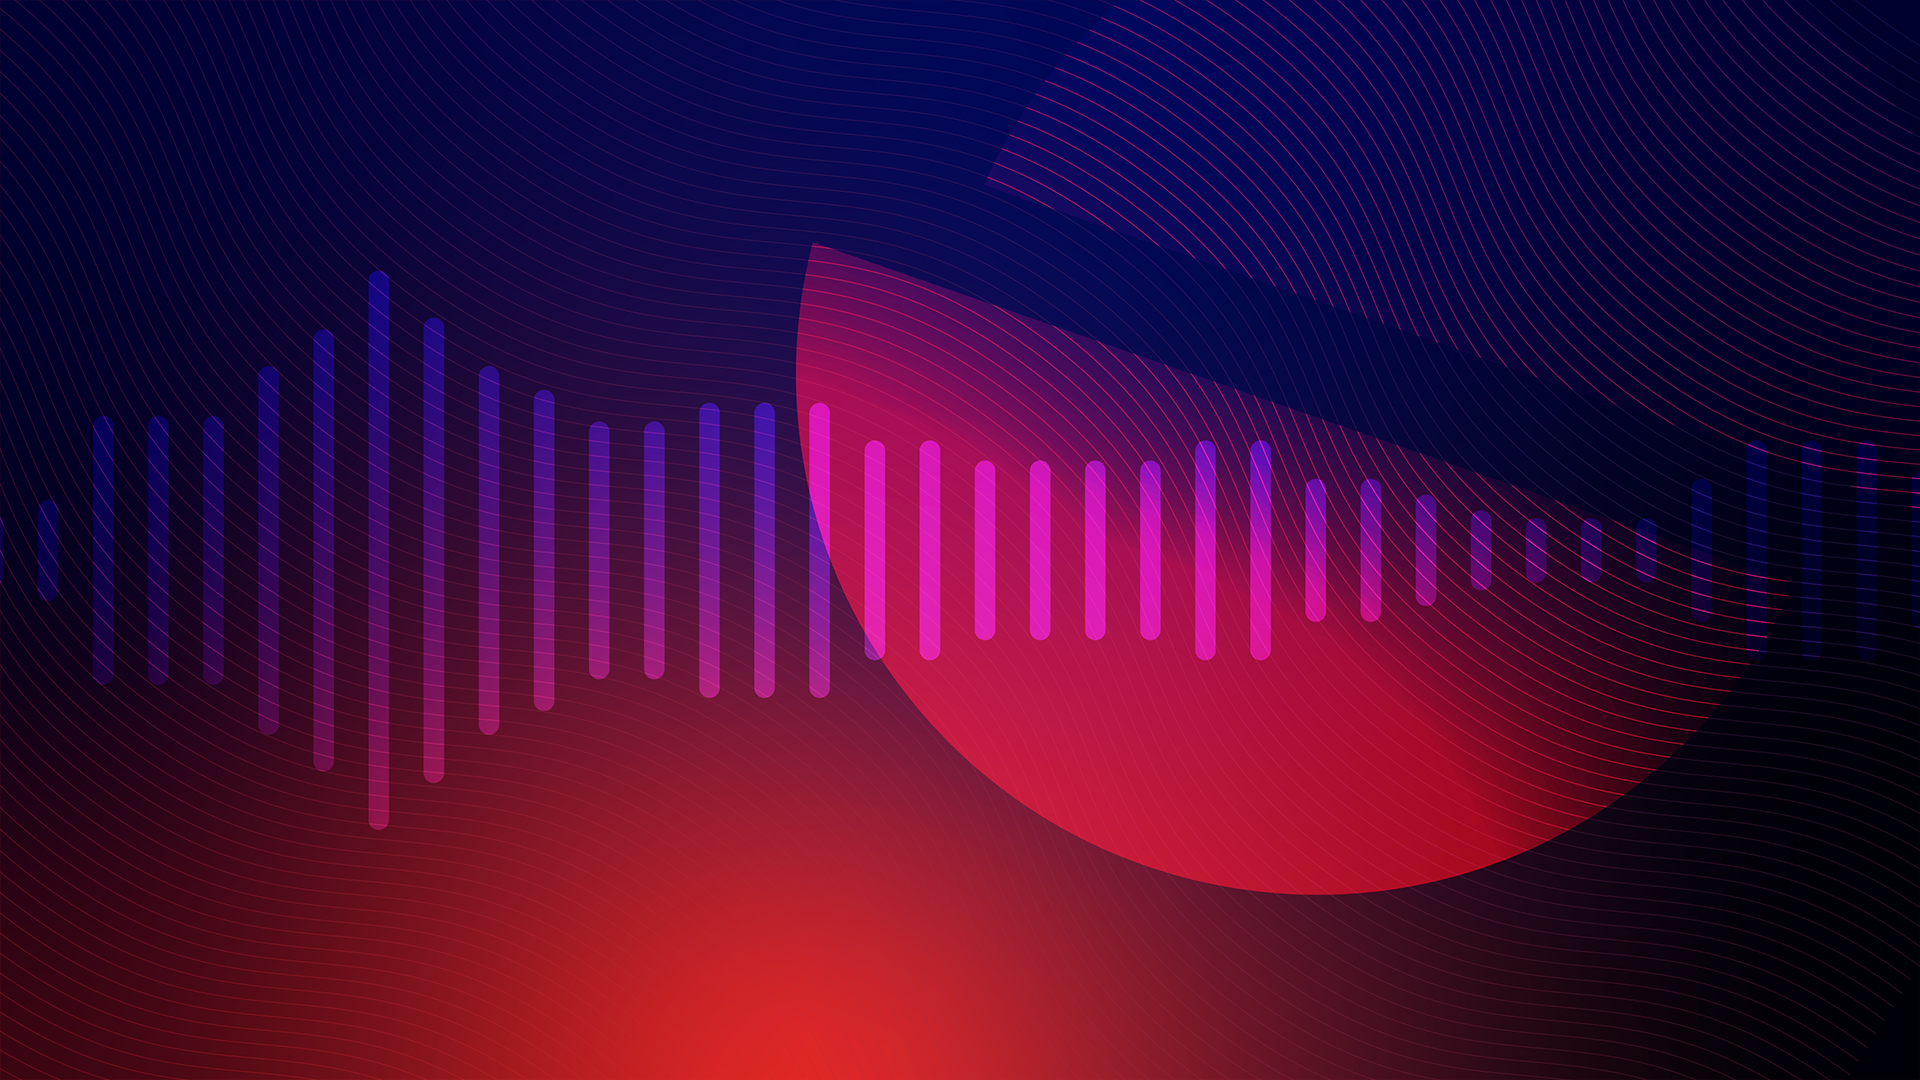 Abstract circles on a purple and red background